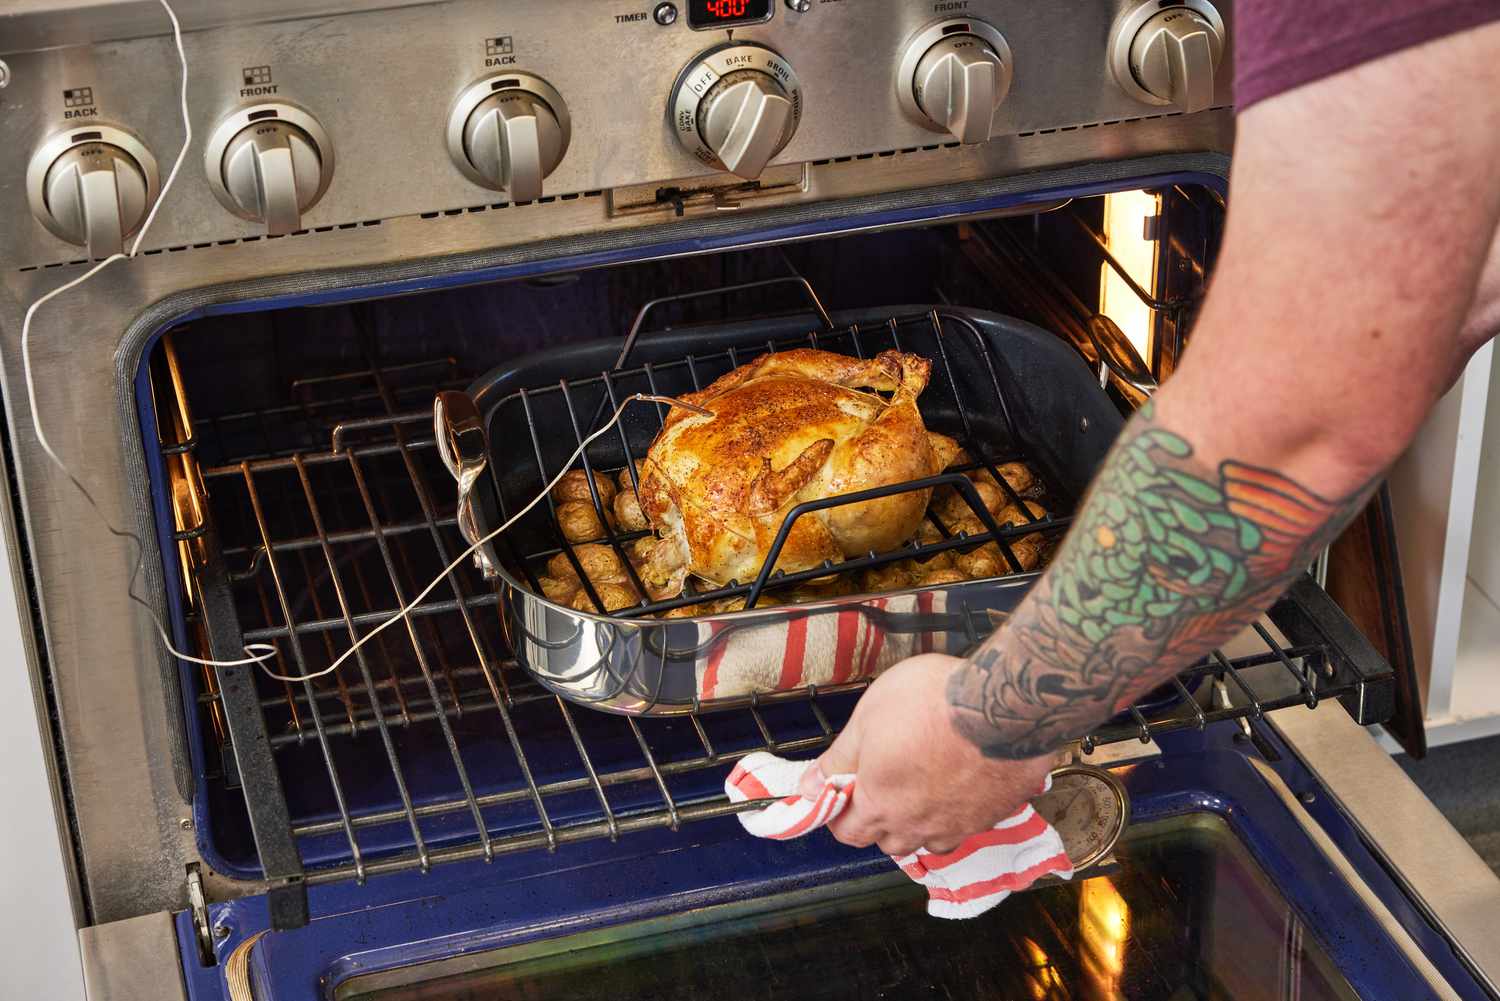 Hand pulling the All-Clad Stainless Steel Nonstick Roasting Pan With Rack with a chicken from the oven